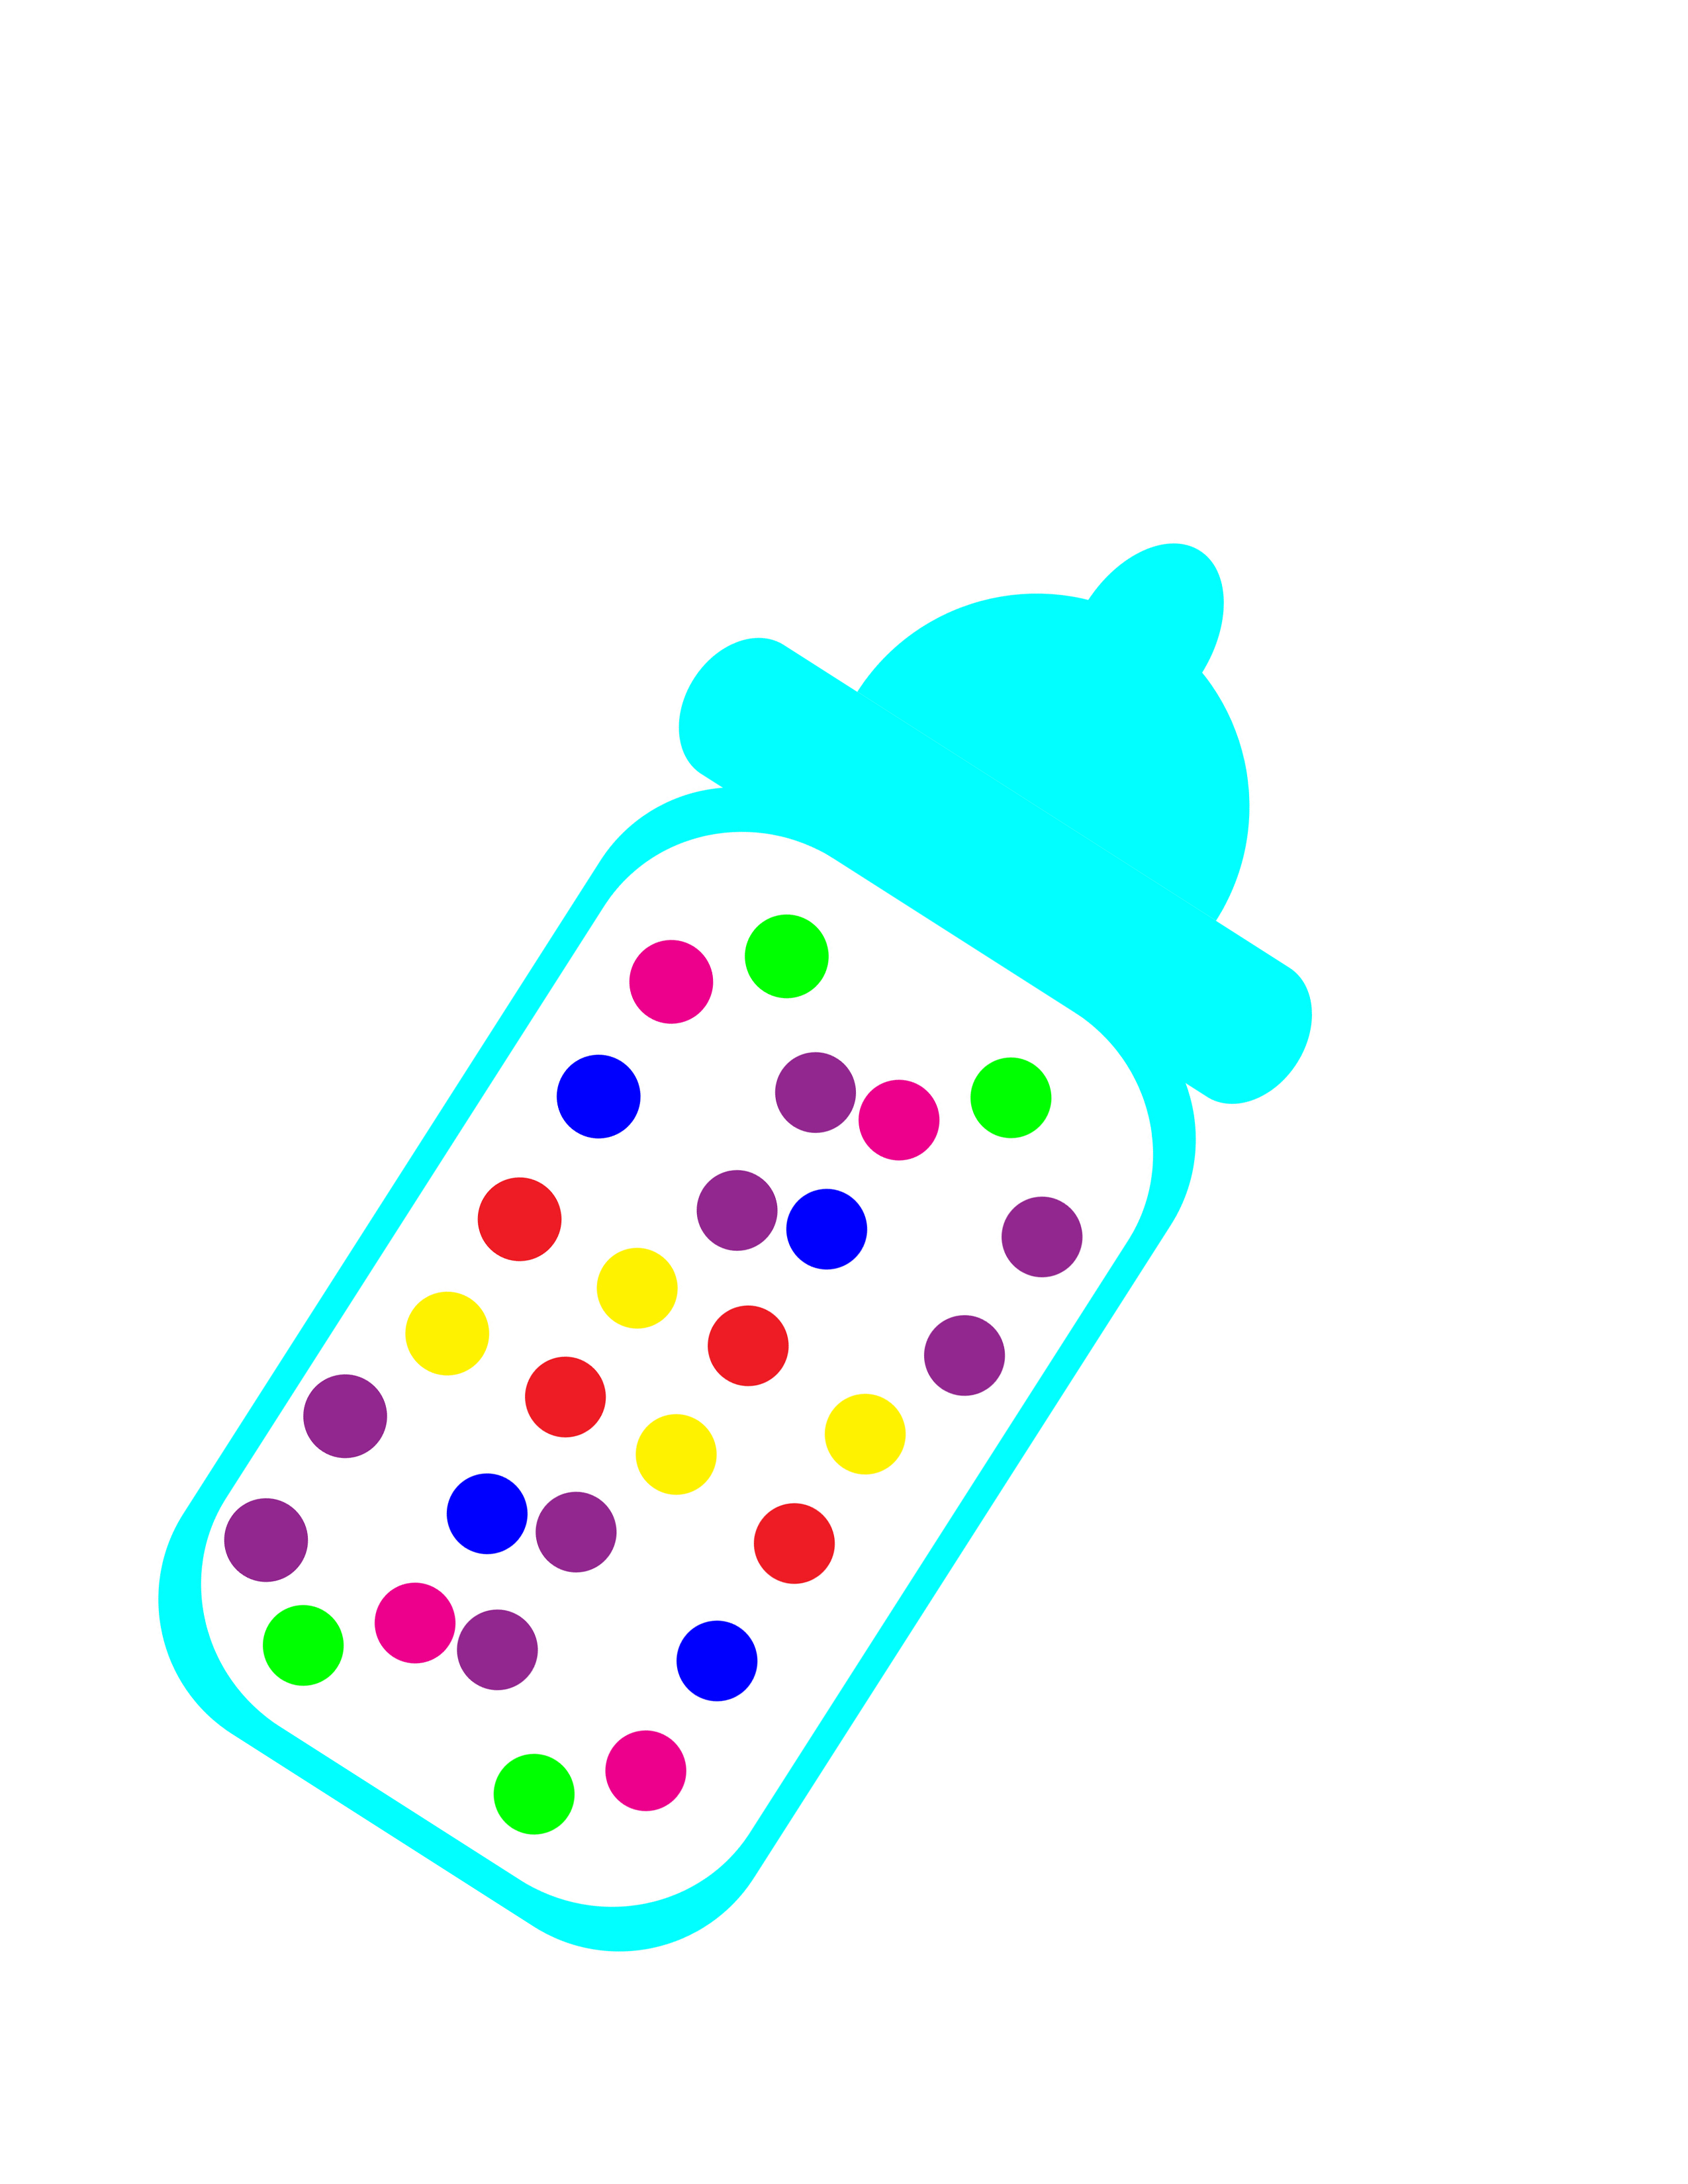 Guess The Candy Game - Candy Filled Baby Bottle (2550x3300)